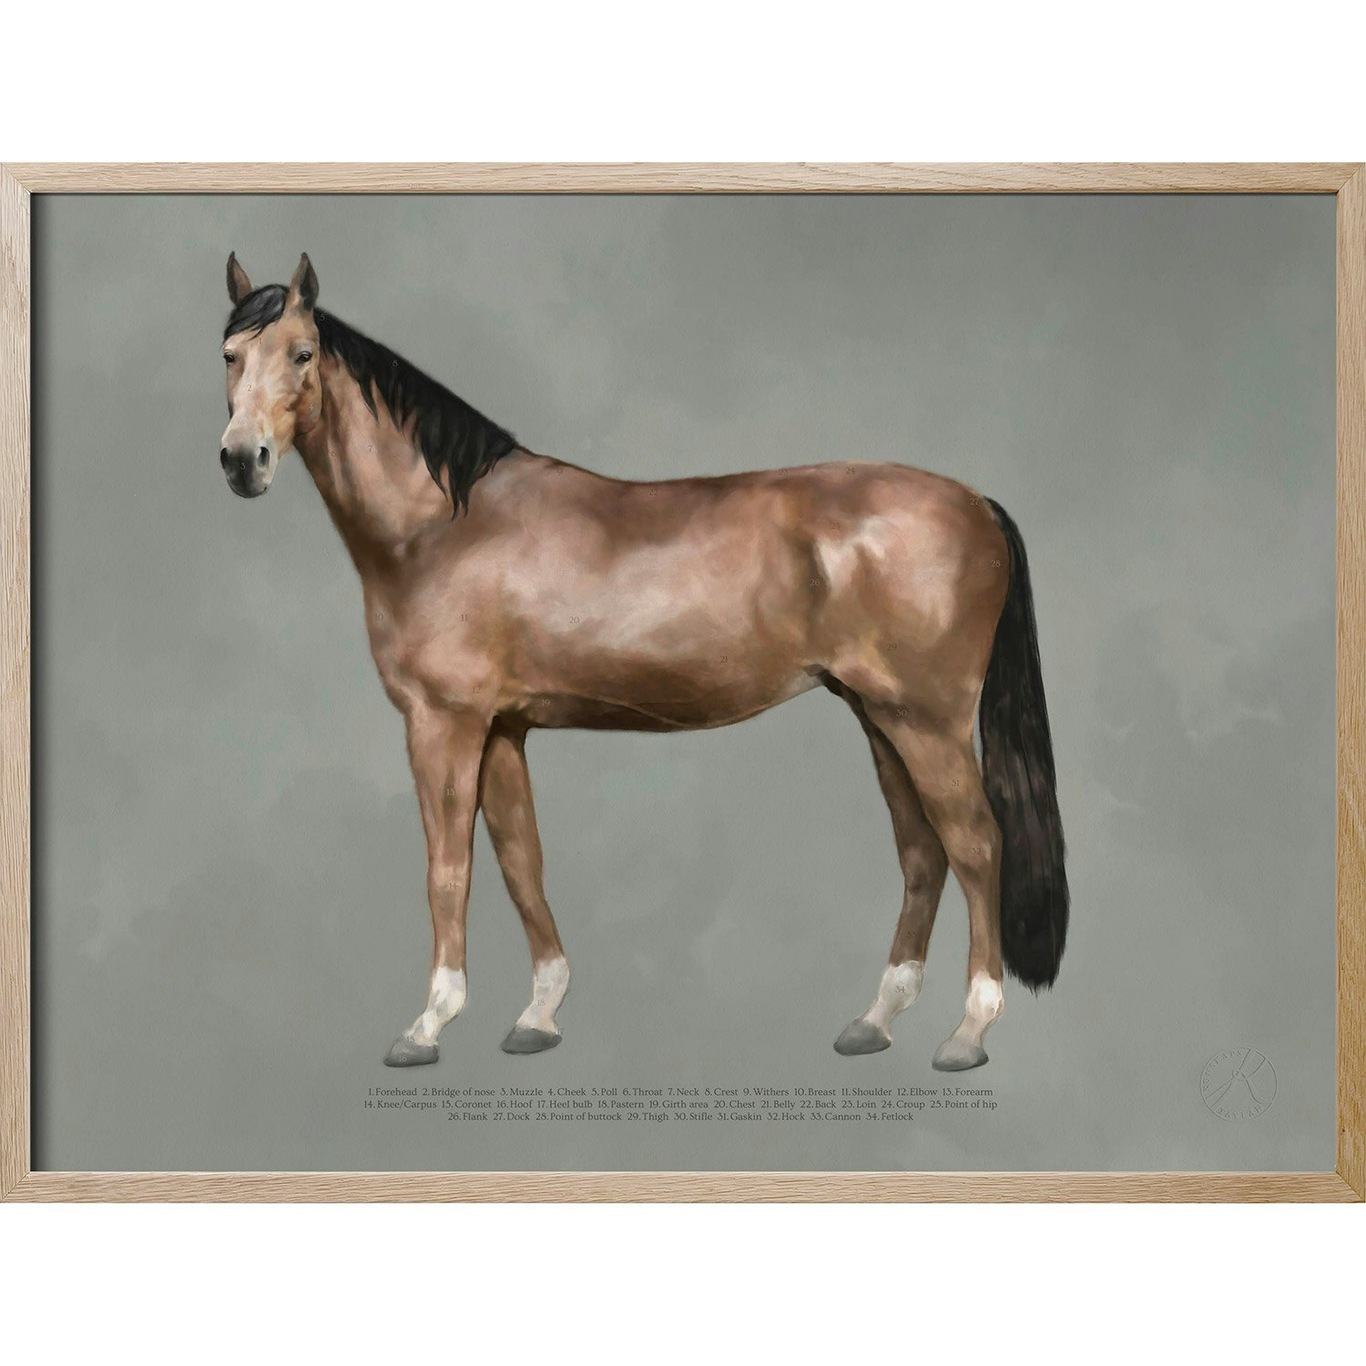 The Horse Poster, 30x40 cm